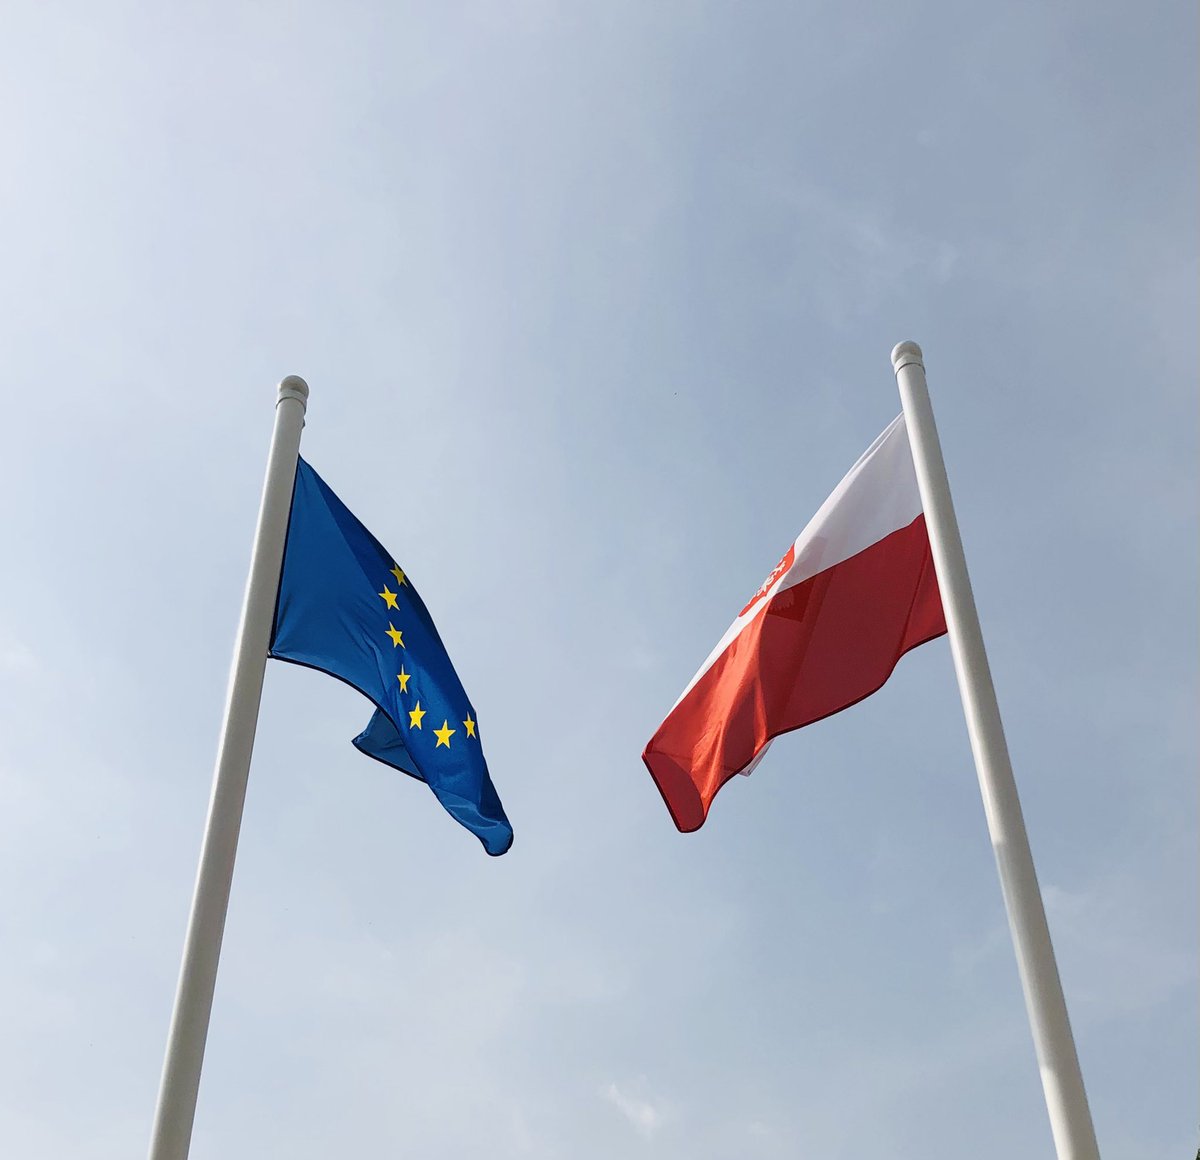 We kindly inform that due to celebration of Uprising Day the Consulate General of the Republic of Poland in Erbil will be closed on Tuesday, March 5th. The Consulate will resume work on Wednesday, March 6th